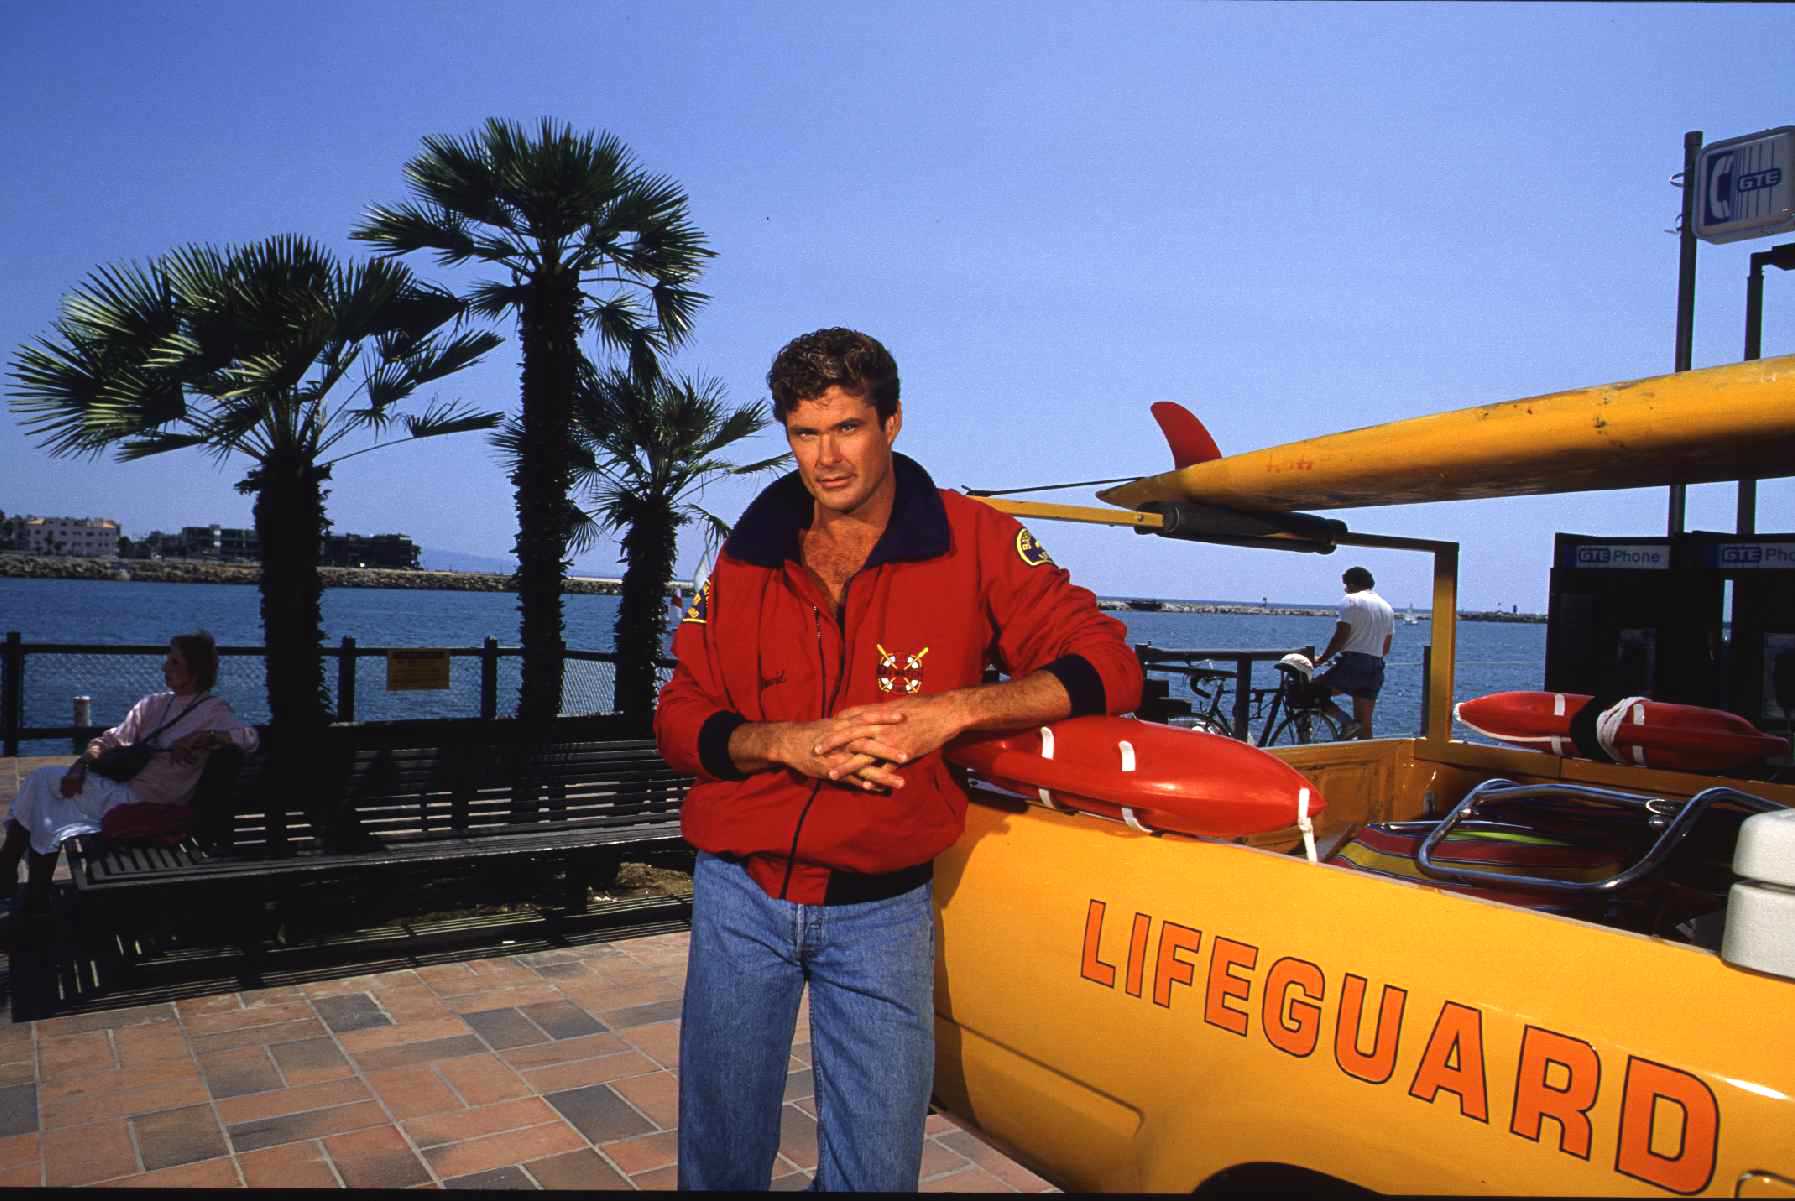 David Hasselhoff leans on the lifeguard truck